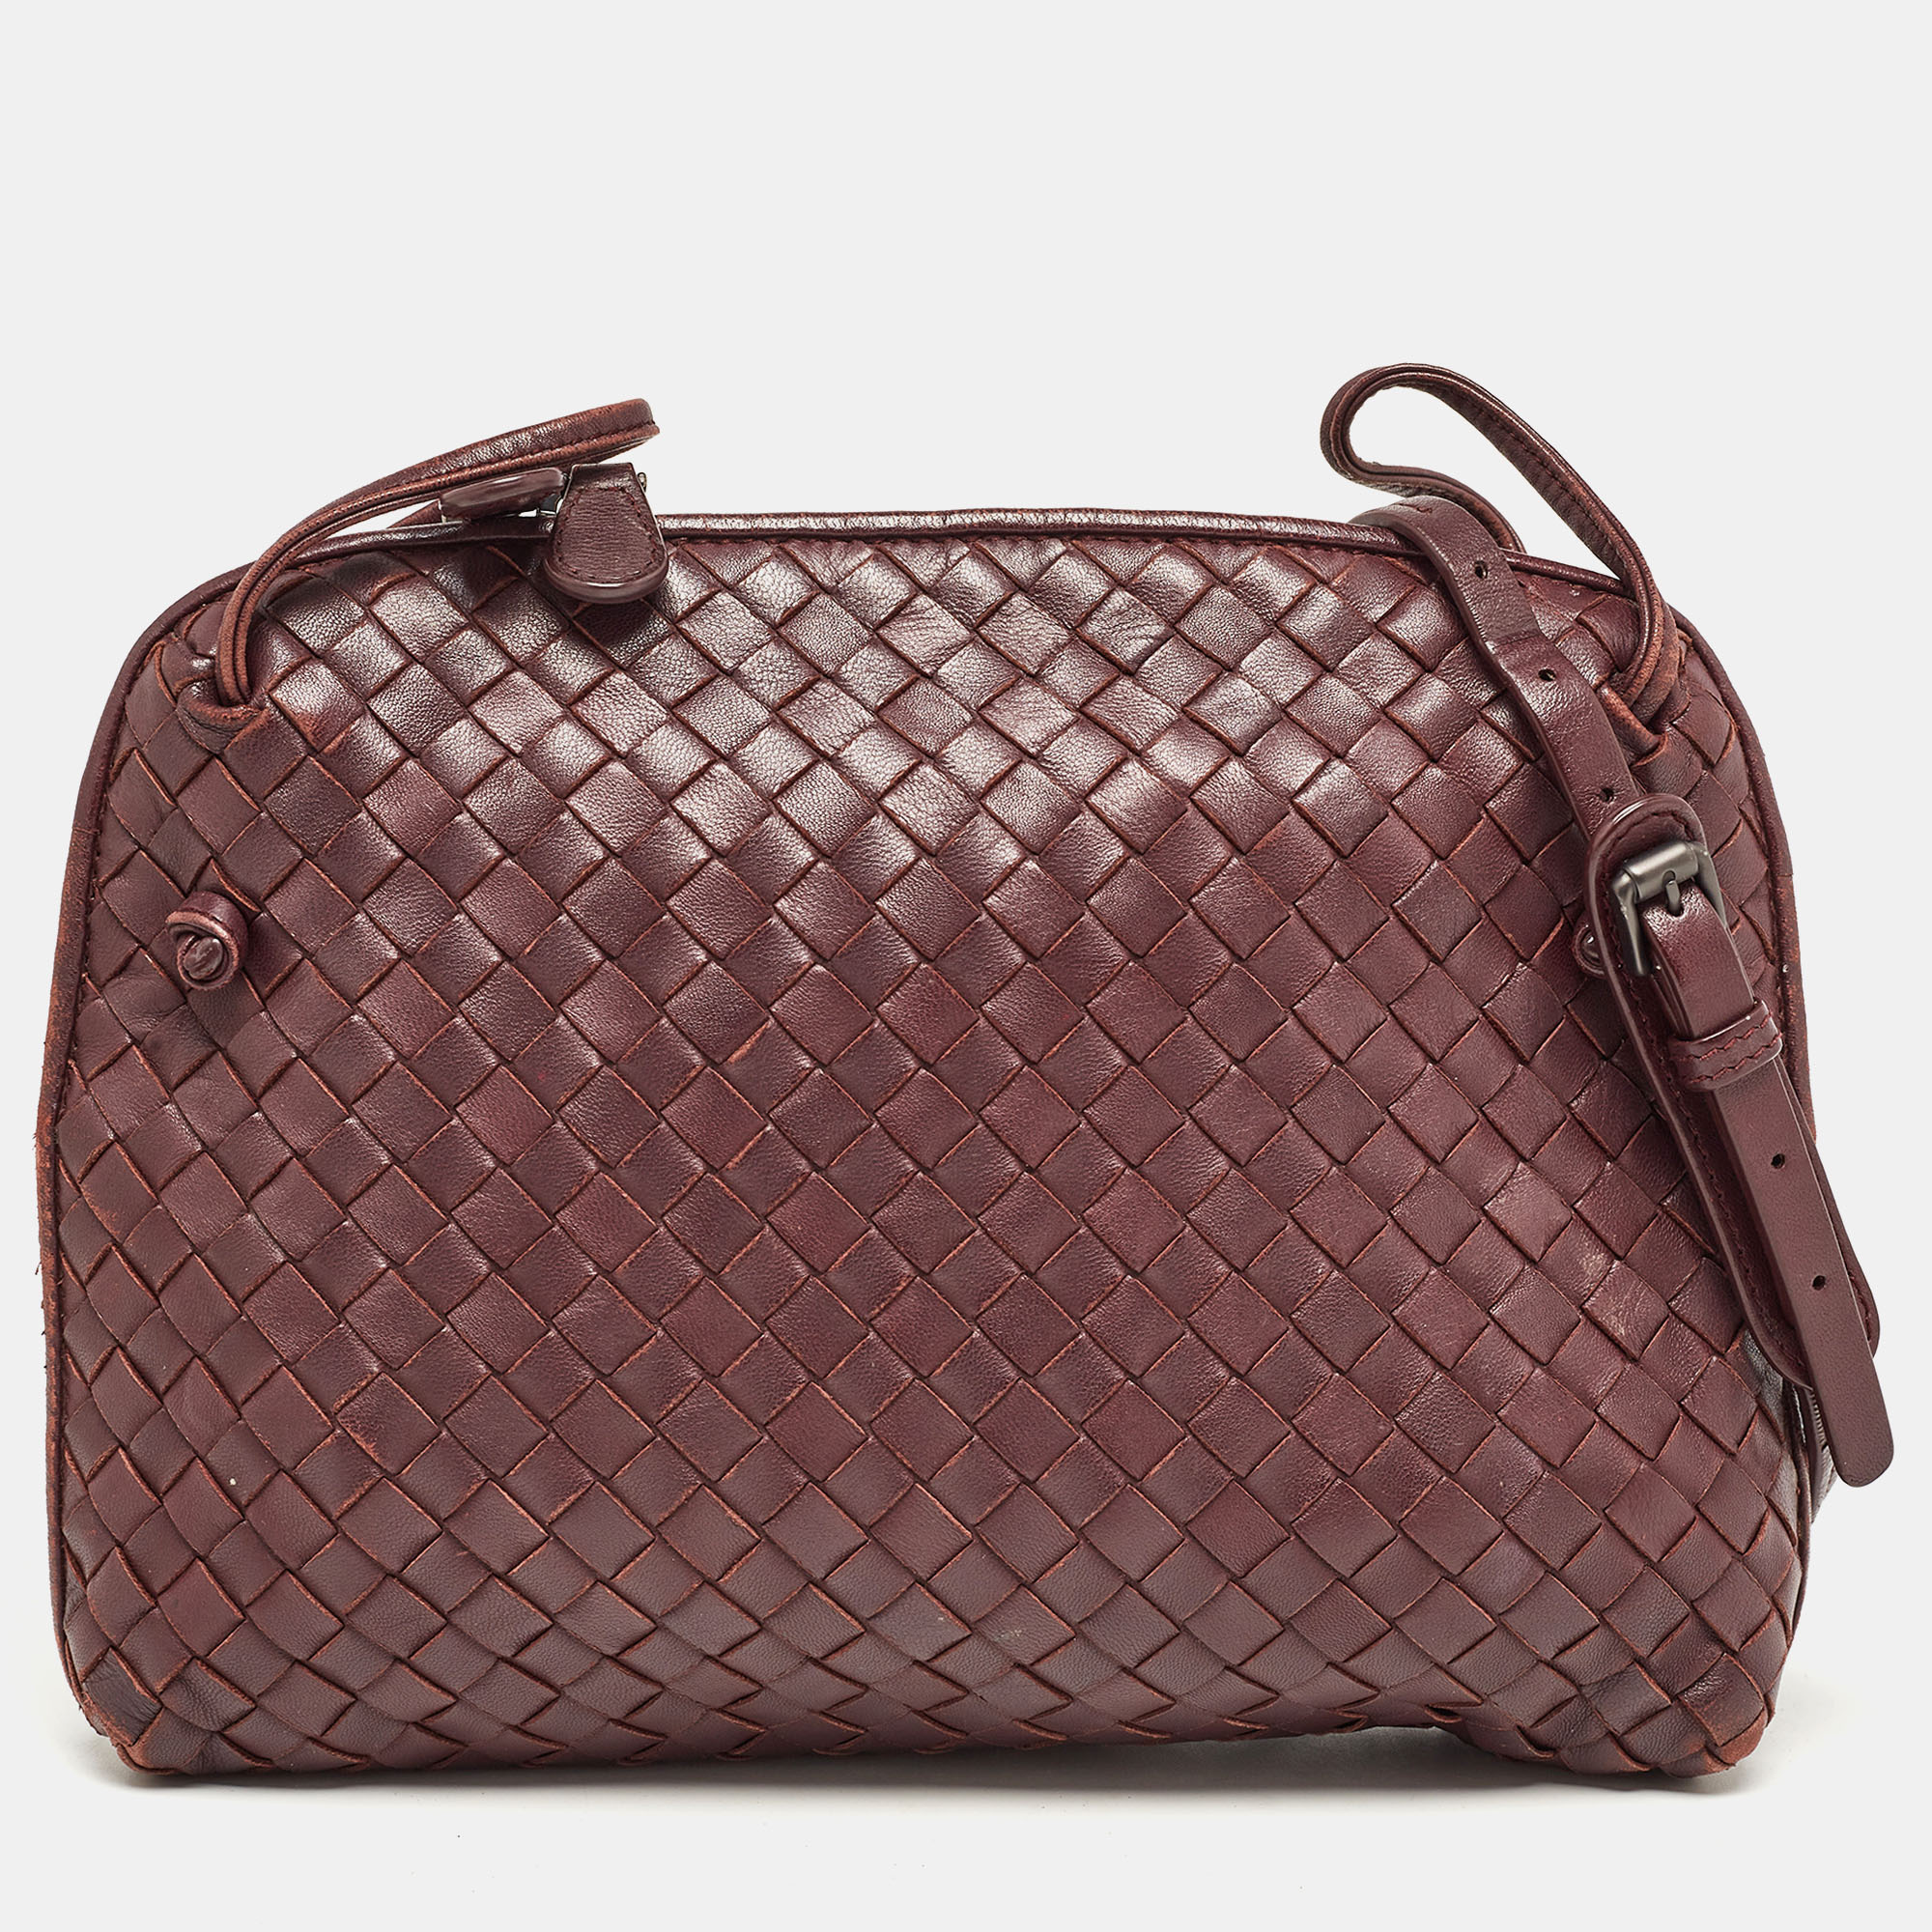 Designed to be durable this lovely Nodini crossbody bag is a prized buy. Chic and easy to carry the Bottega Veneta creation comes with a long shoulder strap and a spacious interior to keep your essentials safe.